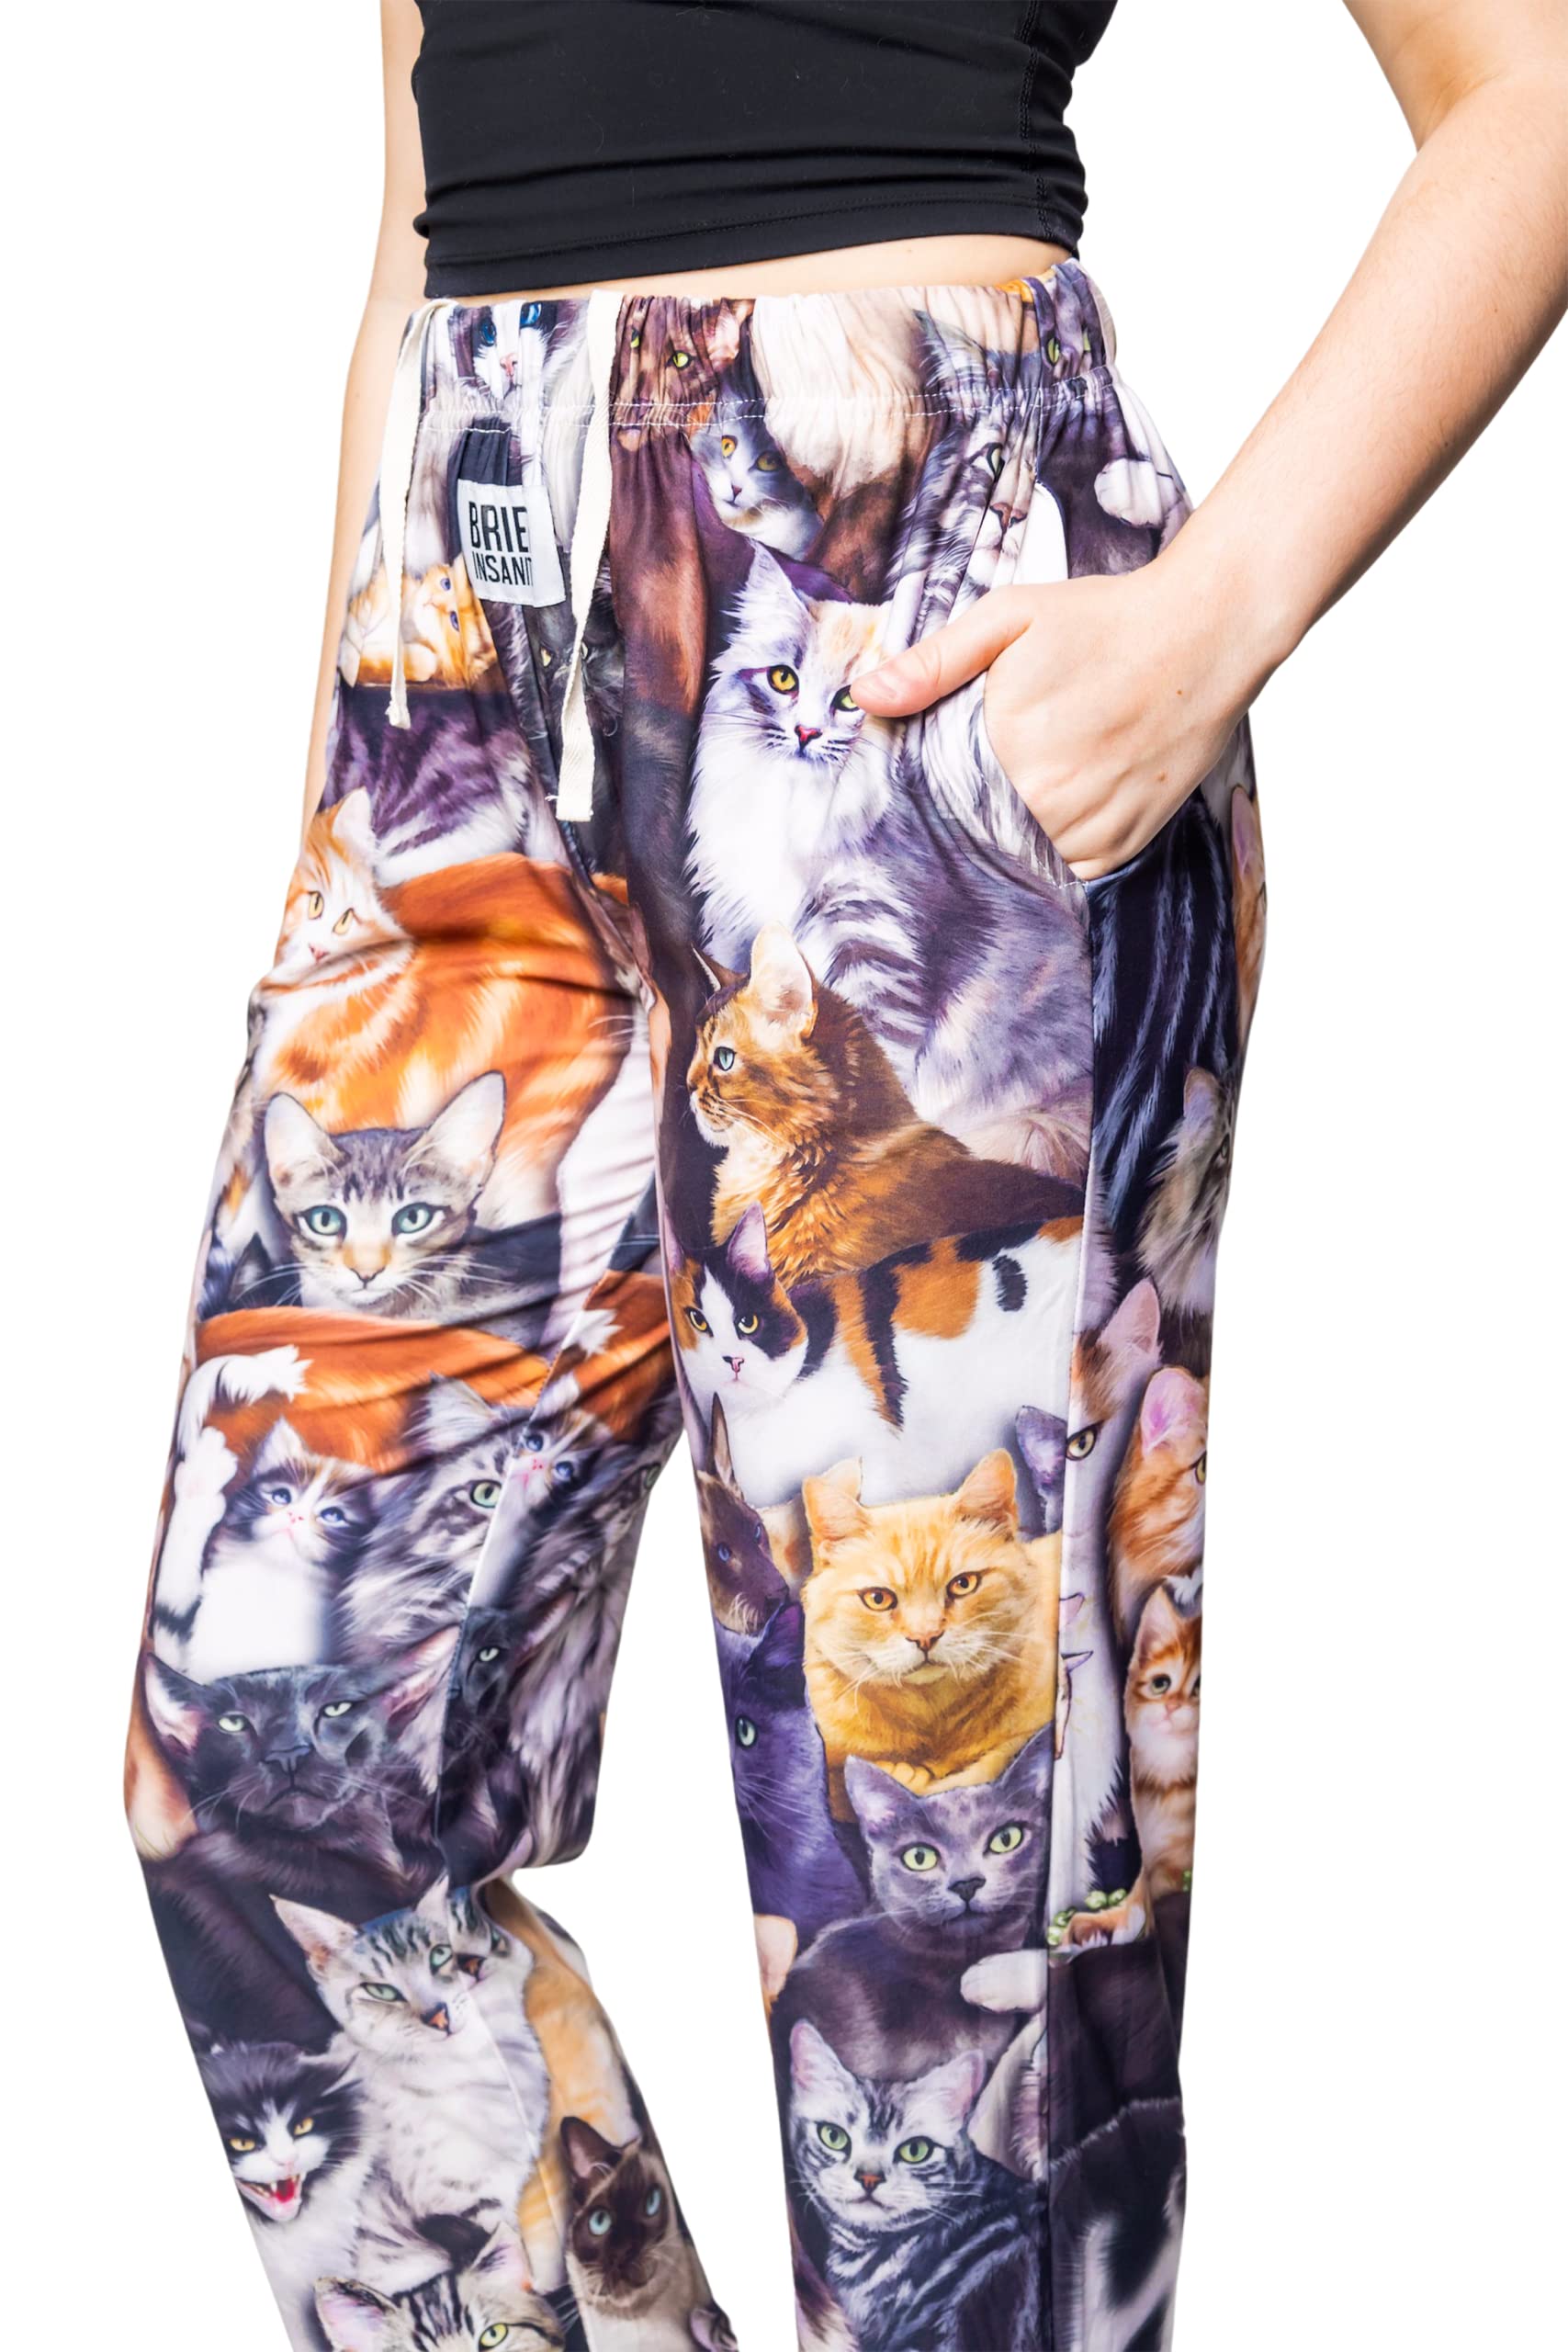 Waist down photo of model wearing All Over Cat pajama lounge pants side view with hand in pocket (white background)